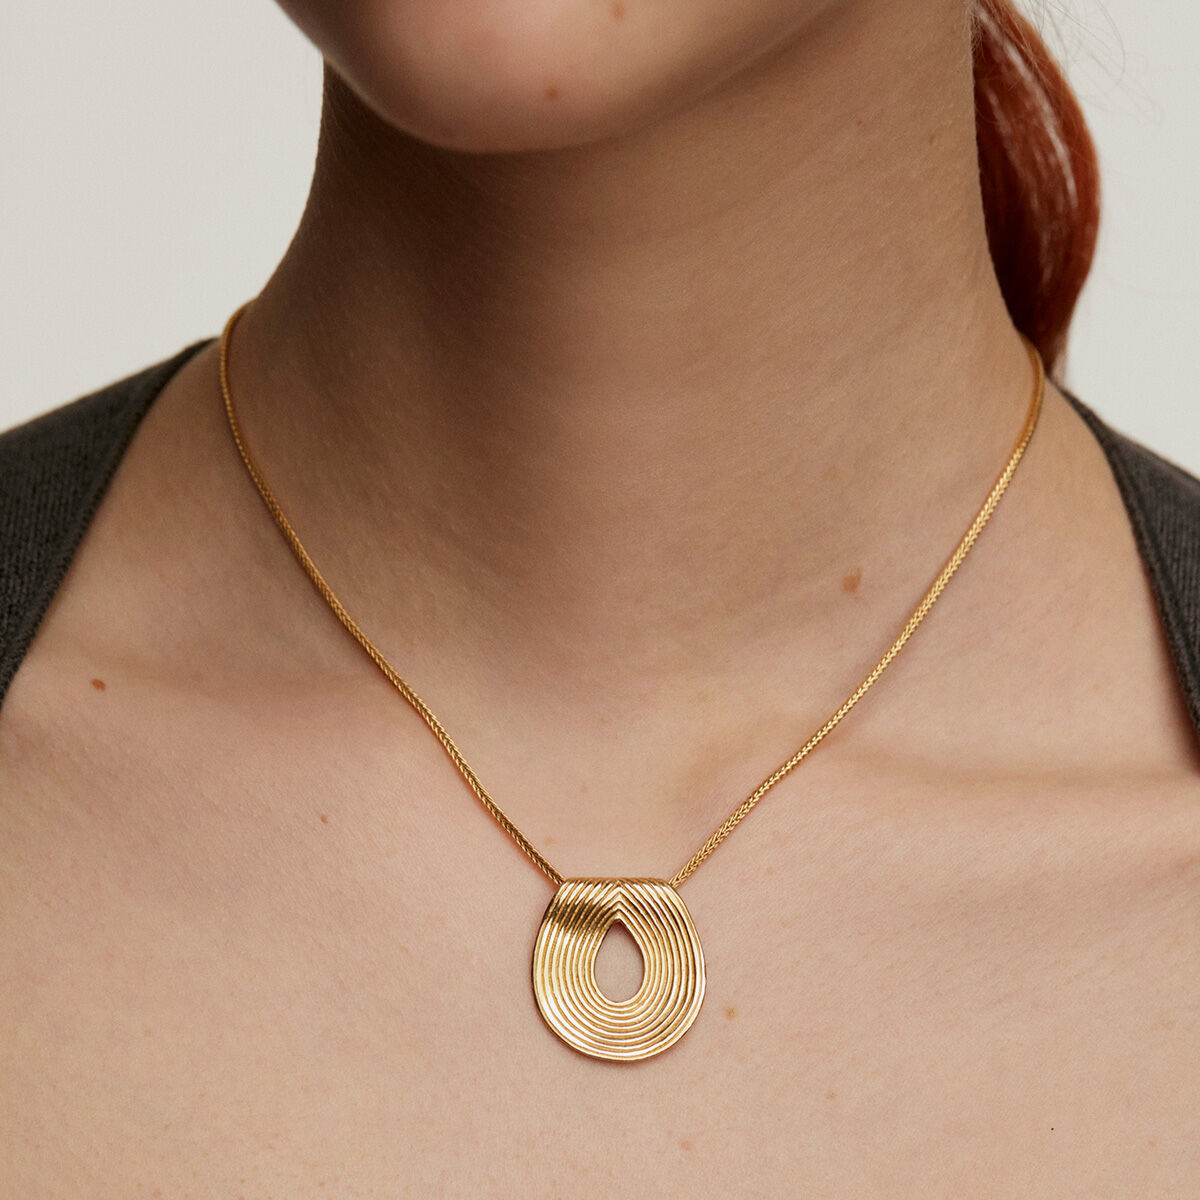 Oval-shaped, embossed pendant in 18kt yellow gold-plated sterling silver, J05212-02, mainproduct